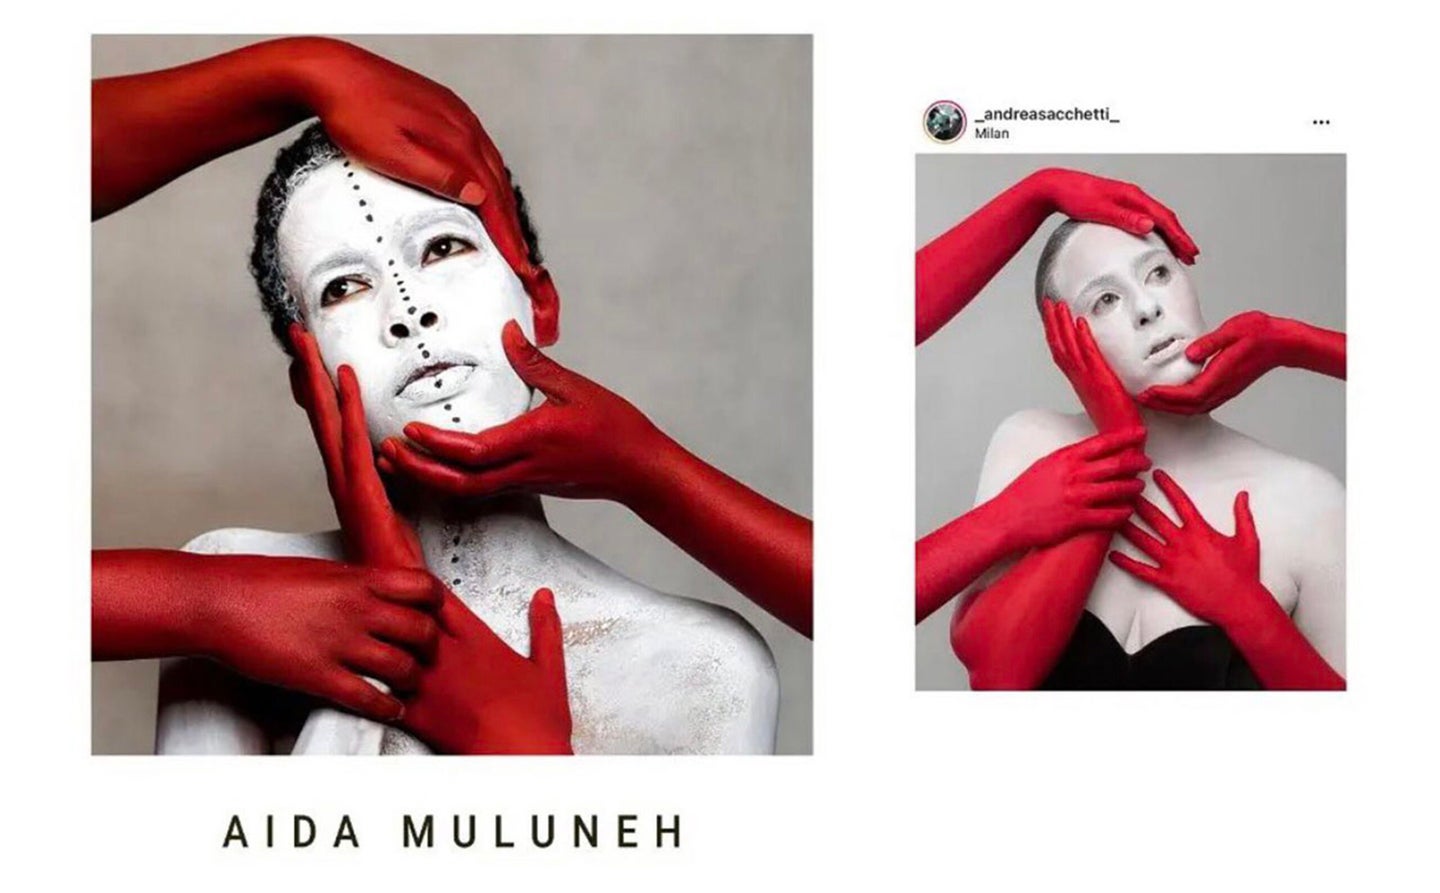 The image on the left is by acclaimed artist, Aïda Muluneh. The image on the right is by photography student Andrea Sacchetti, who has been accused of copying the former and showcasing it in a group exhibition.